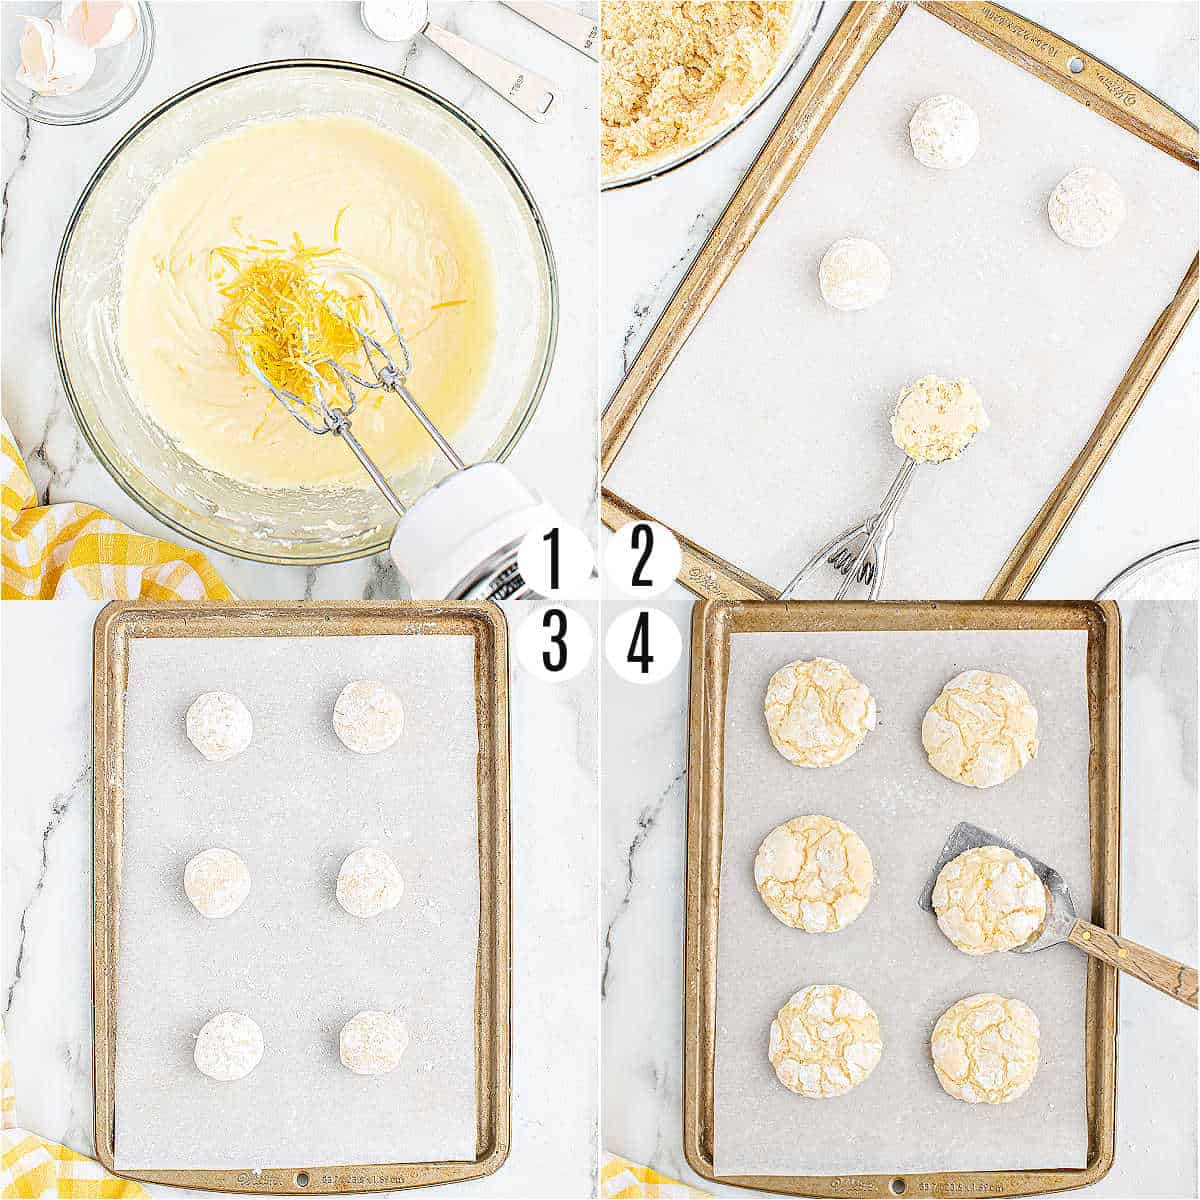 Step by step photos showing how to make lemon gooey cookies.